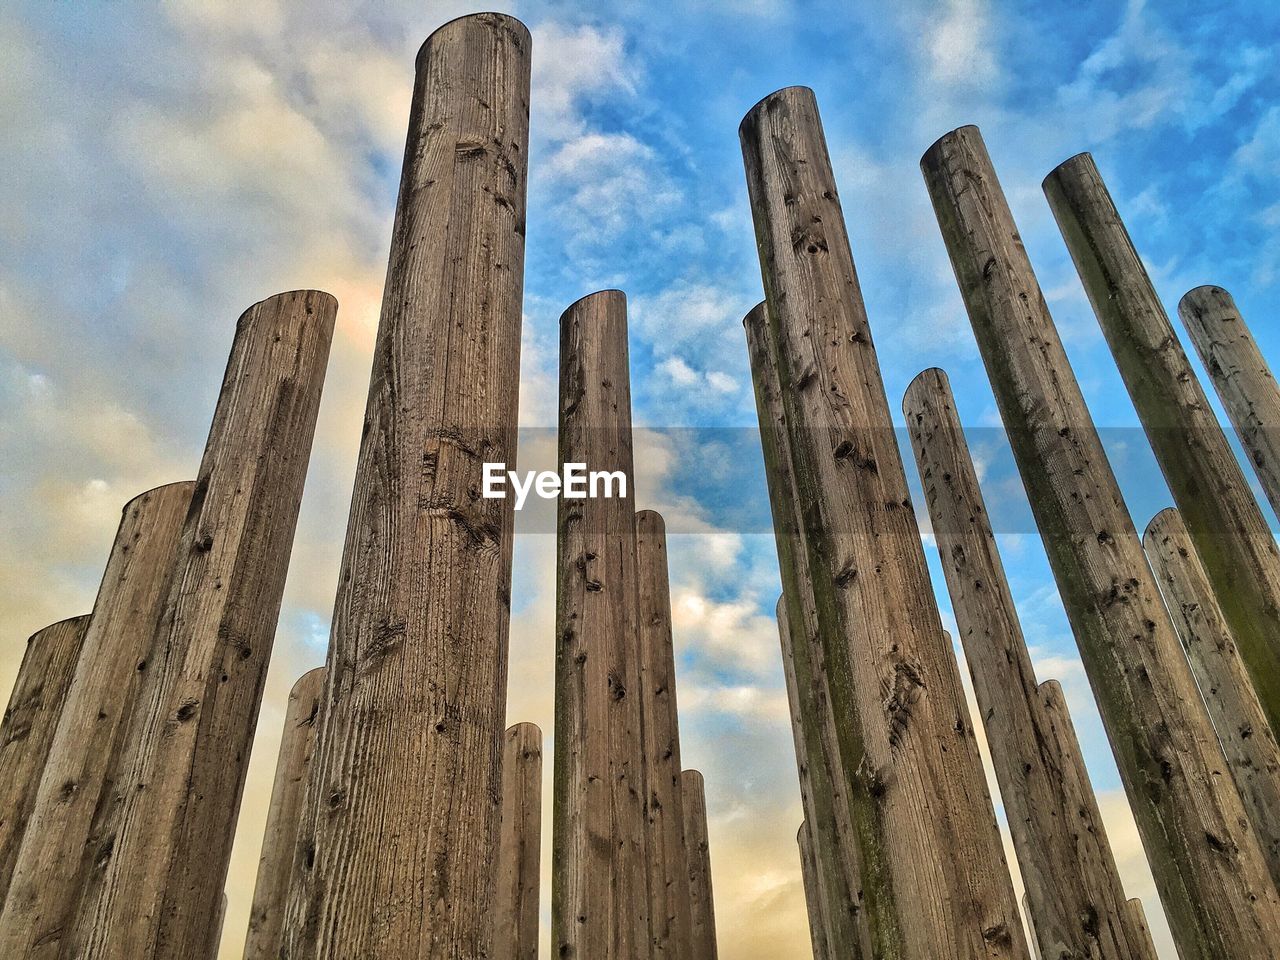 Low angle view of wooden posts against cloudy sky